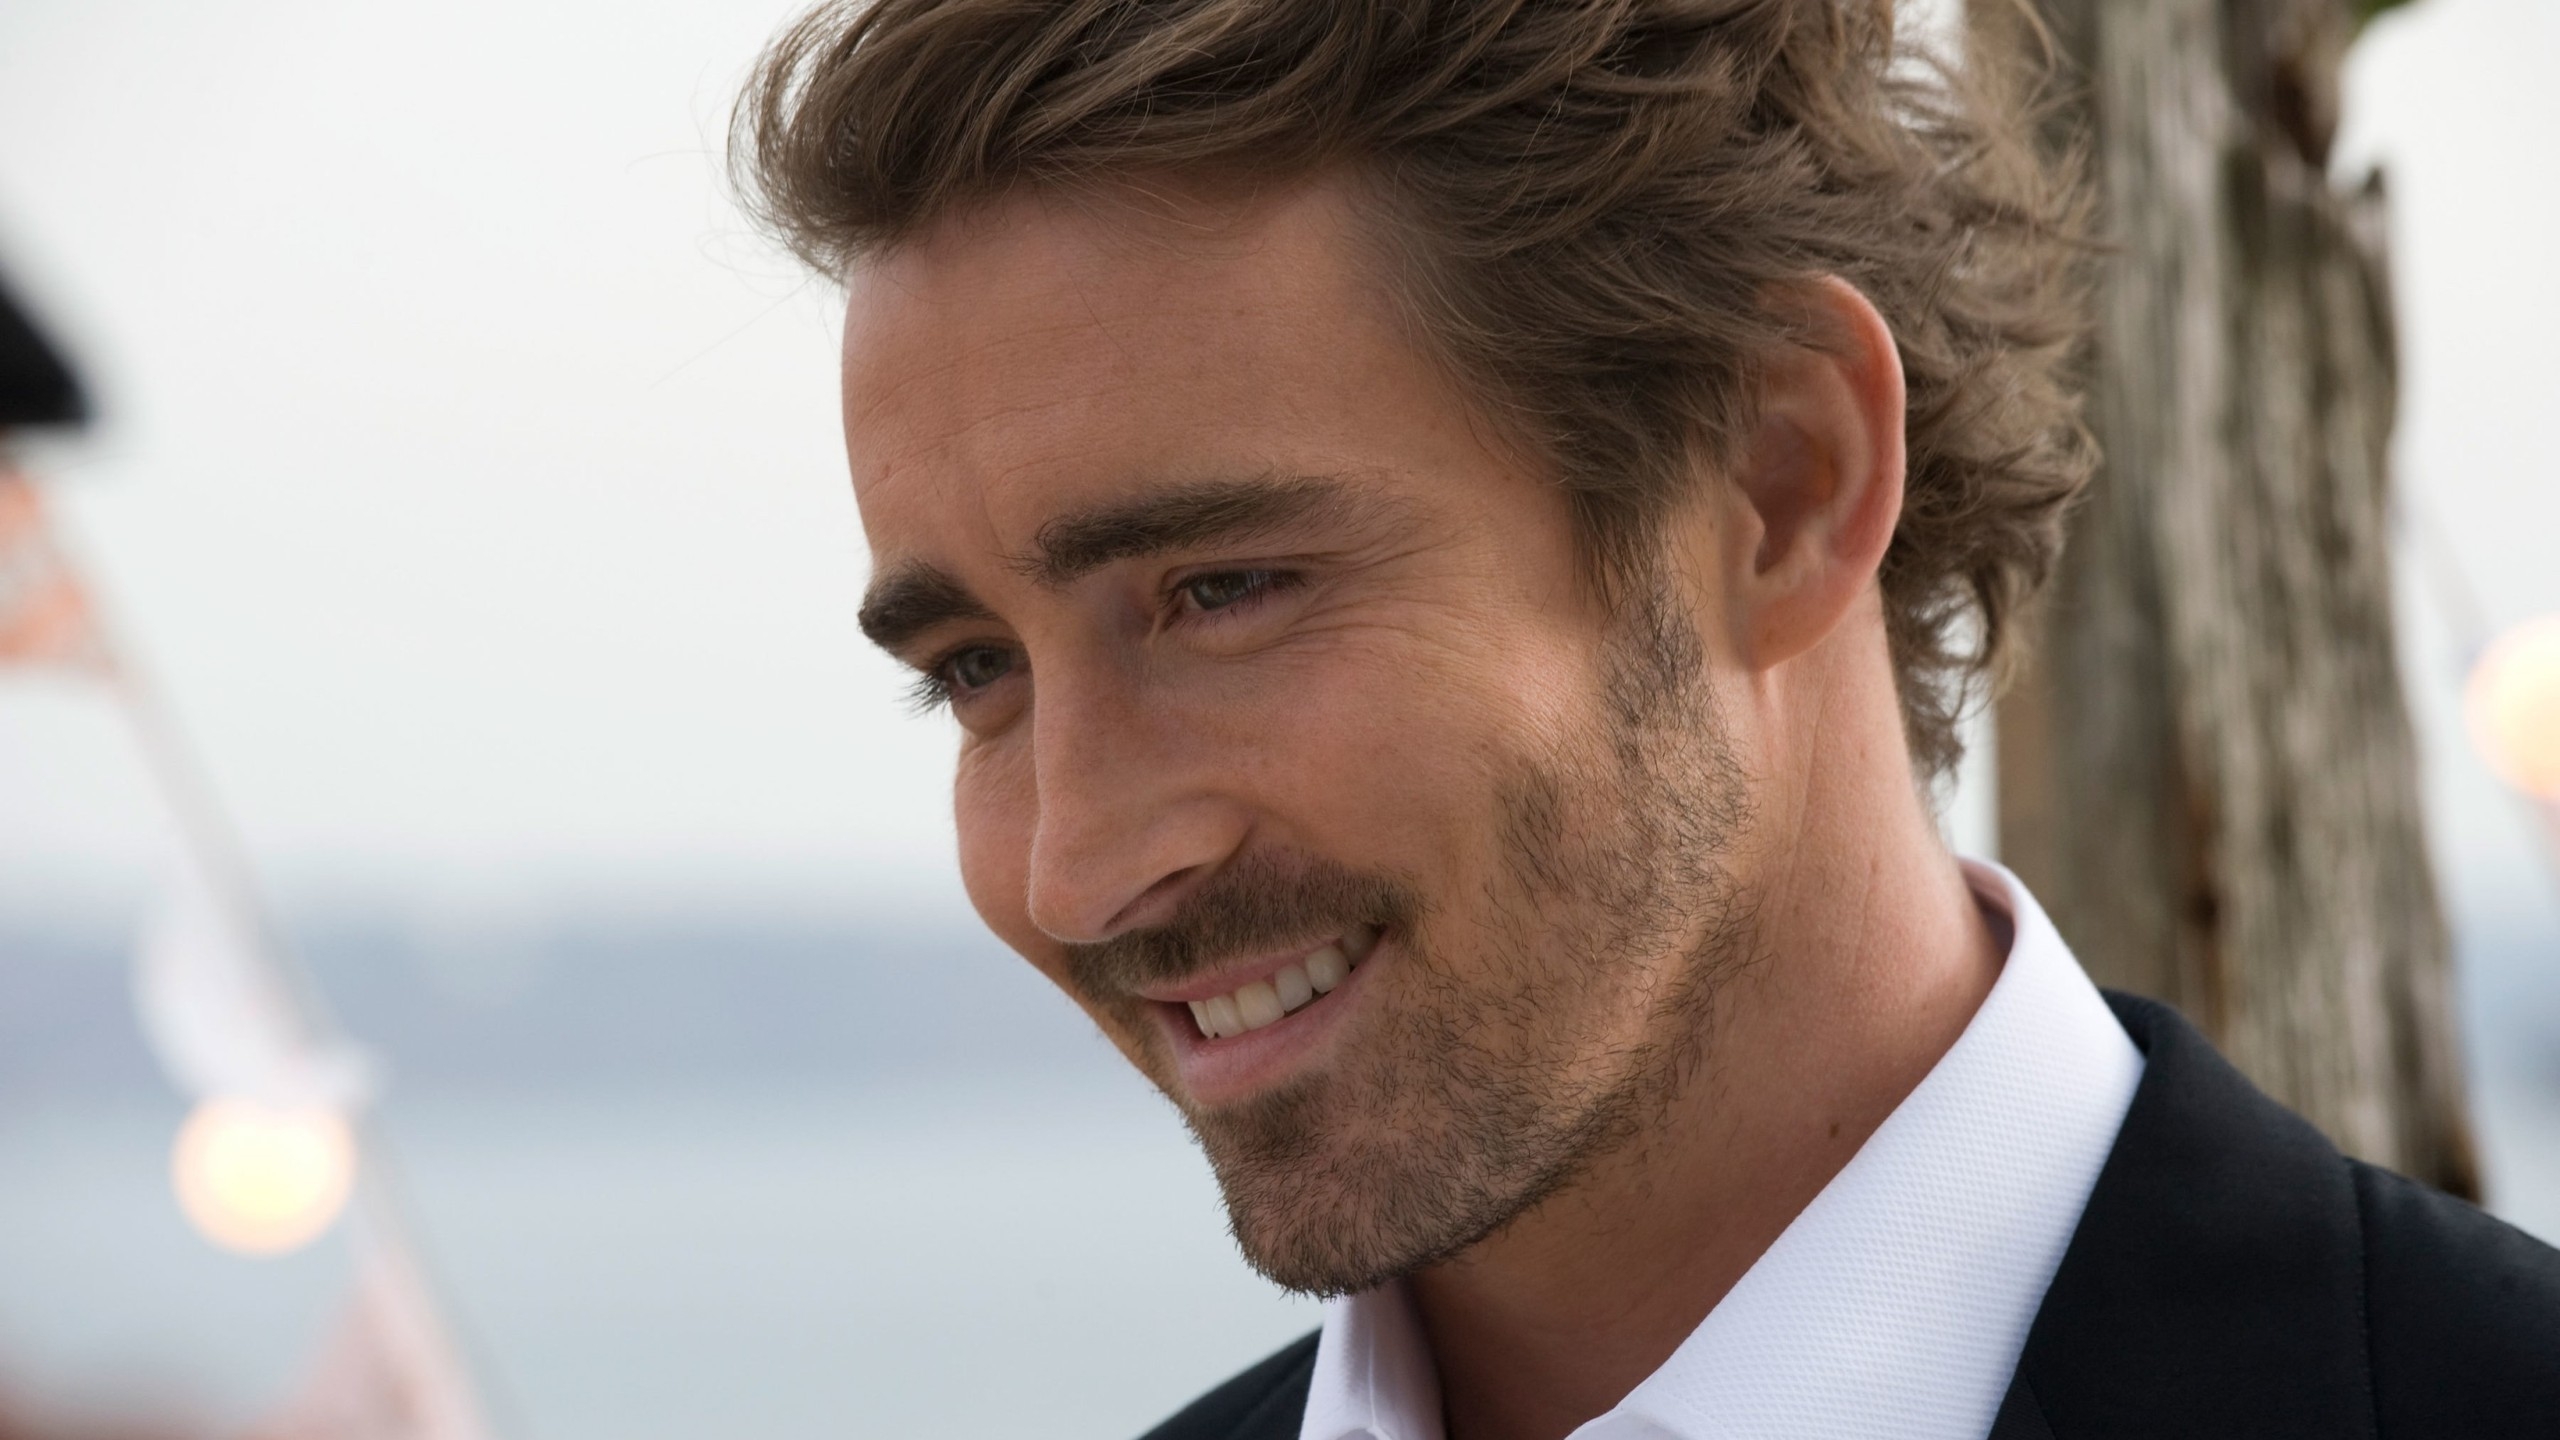 Lee Pace  for 2560x1440 HDTV resolution